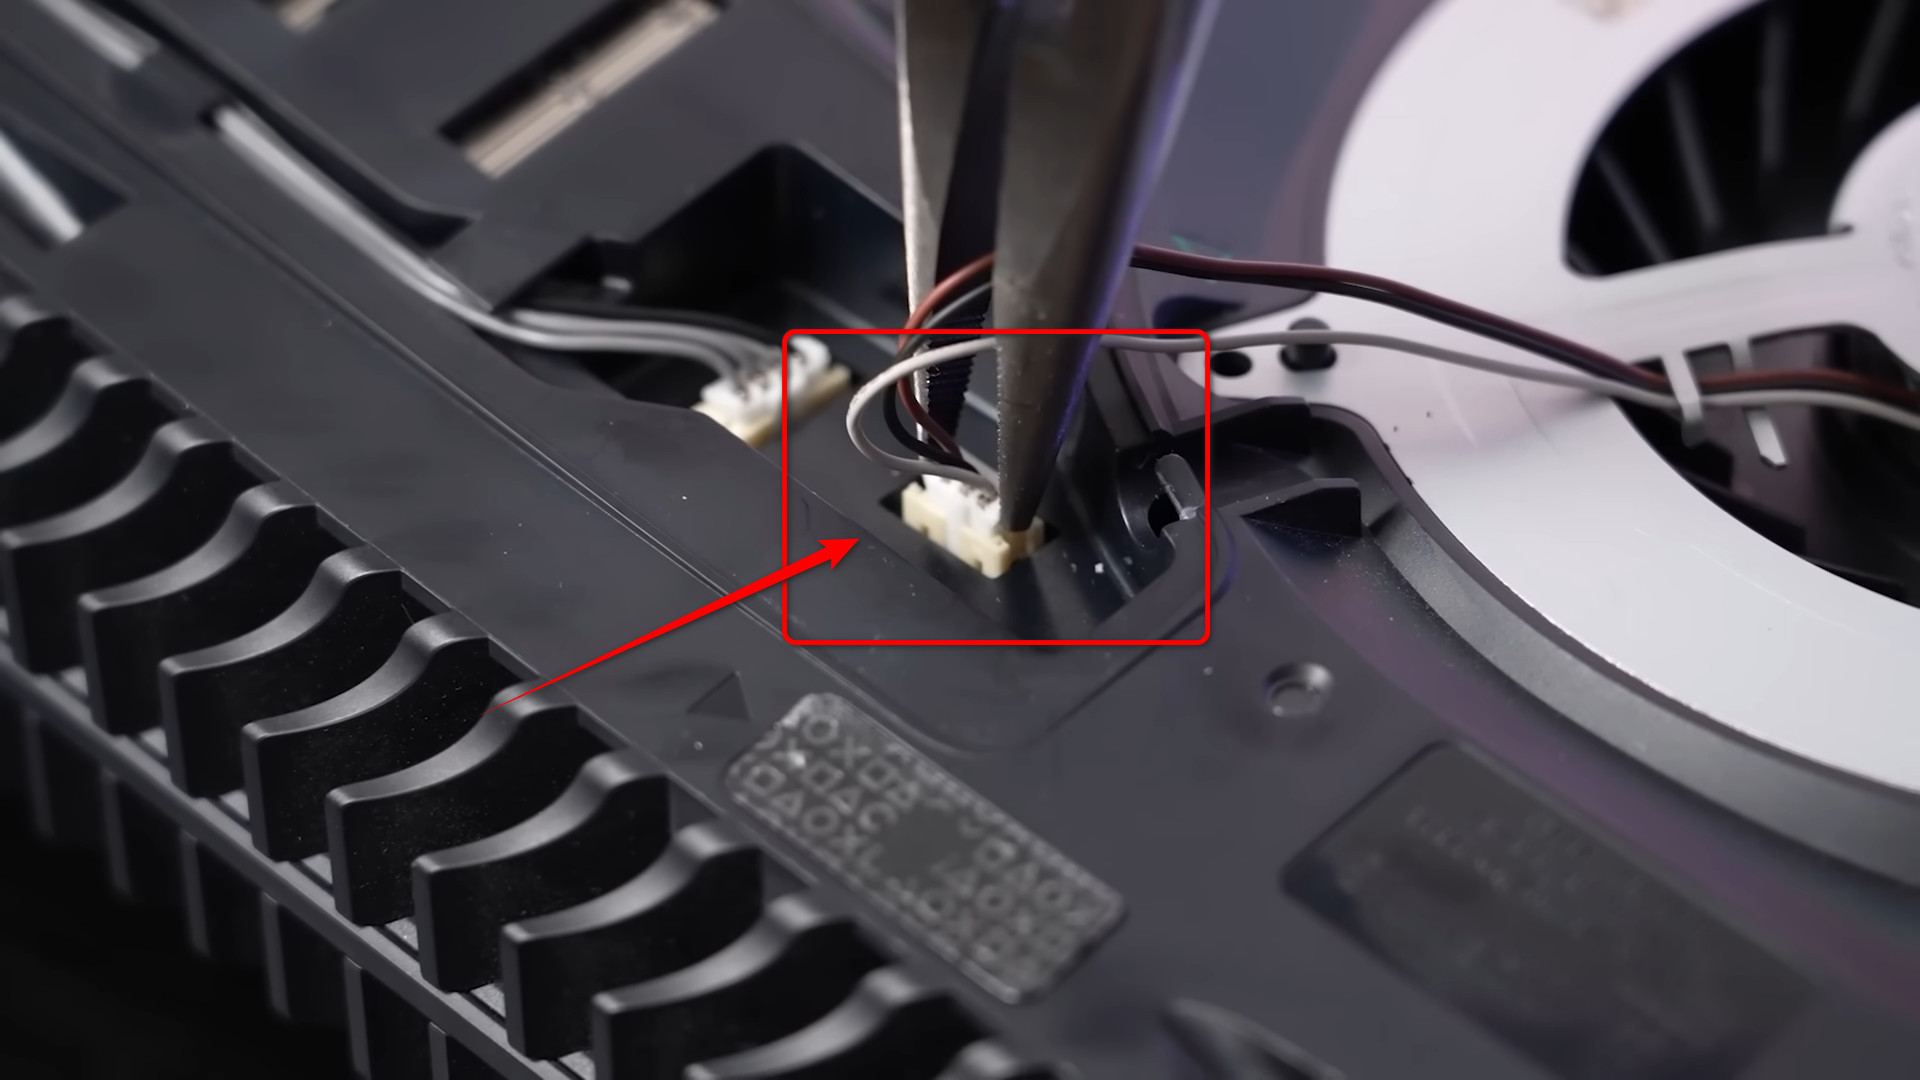 ps5-remove-intake-fan-connection